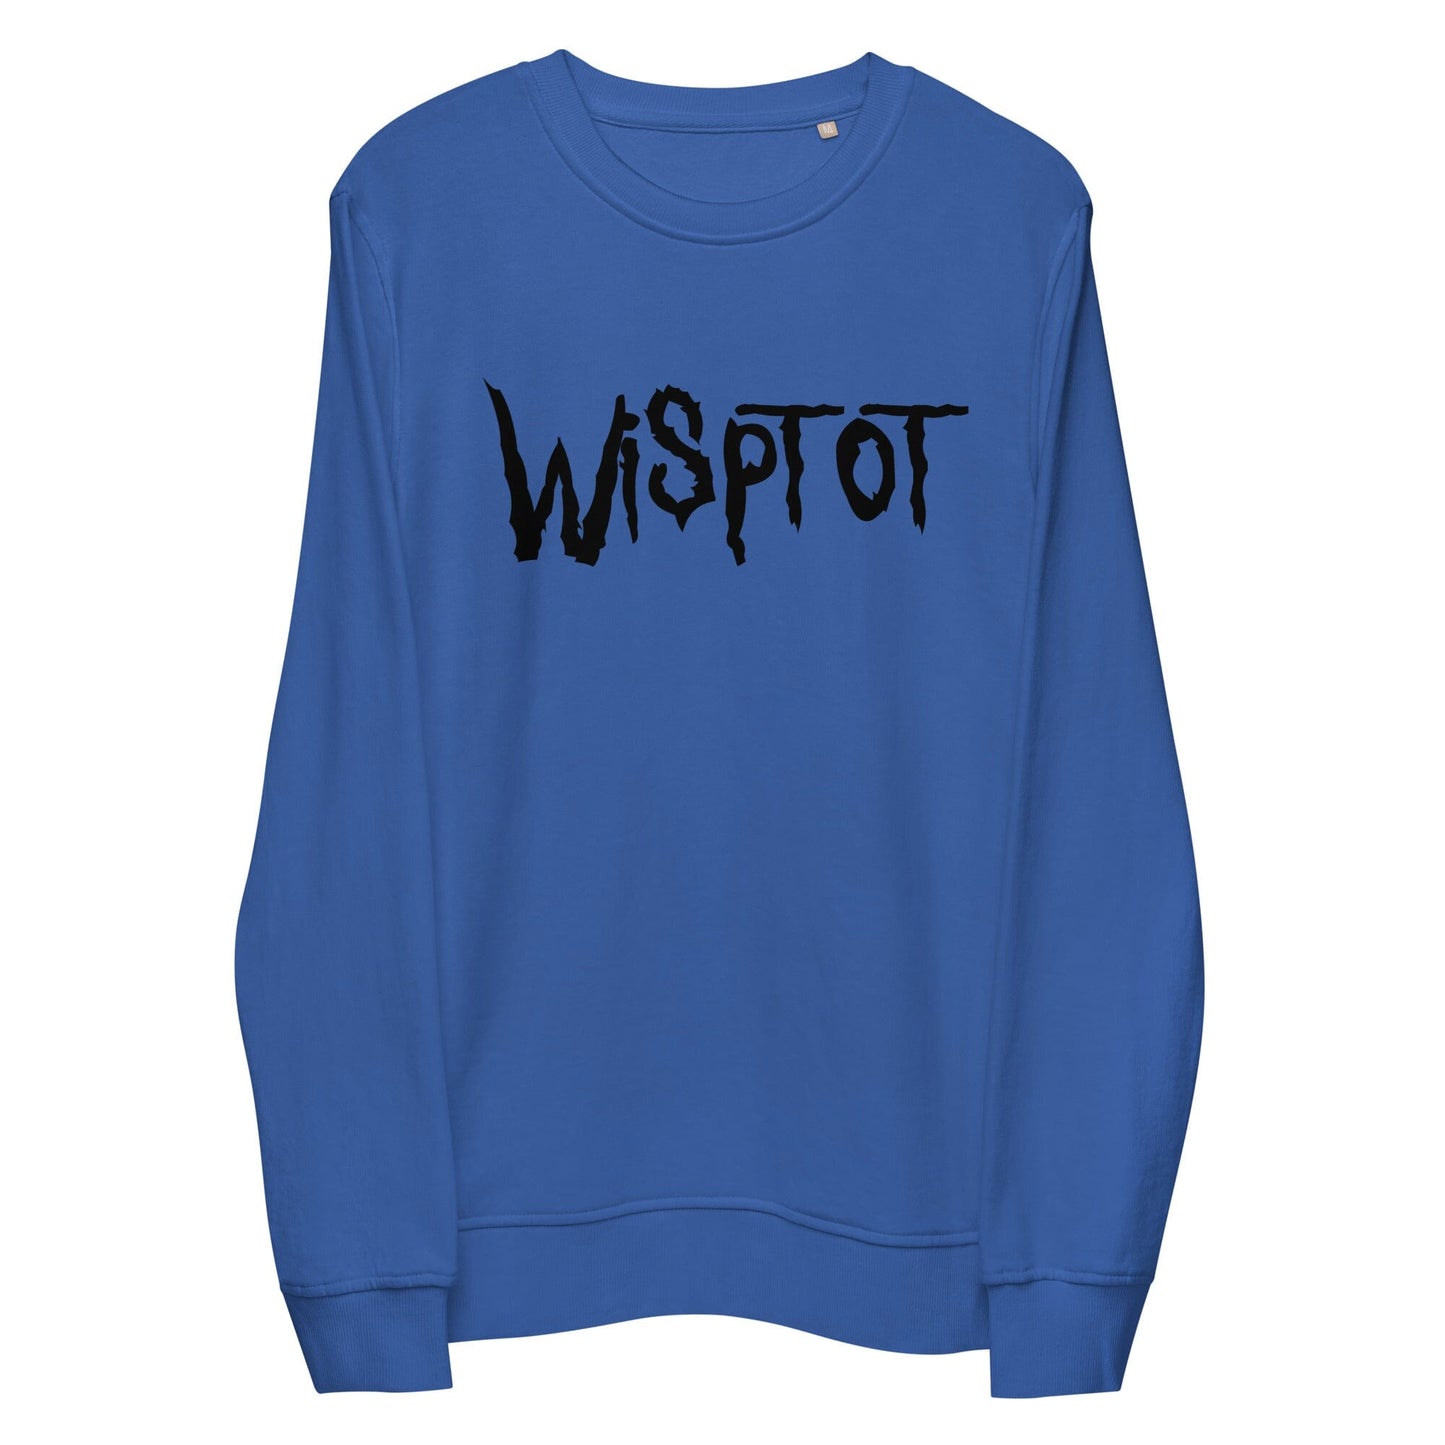 WispTot Sweatshirt [Unfoiled] (All net proceeds go to equally to Kitty CrusAIDe and Rags to Riches Animal Rescue) JoyousJoyfulJoyness Royal Blue S 